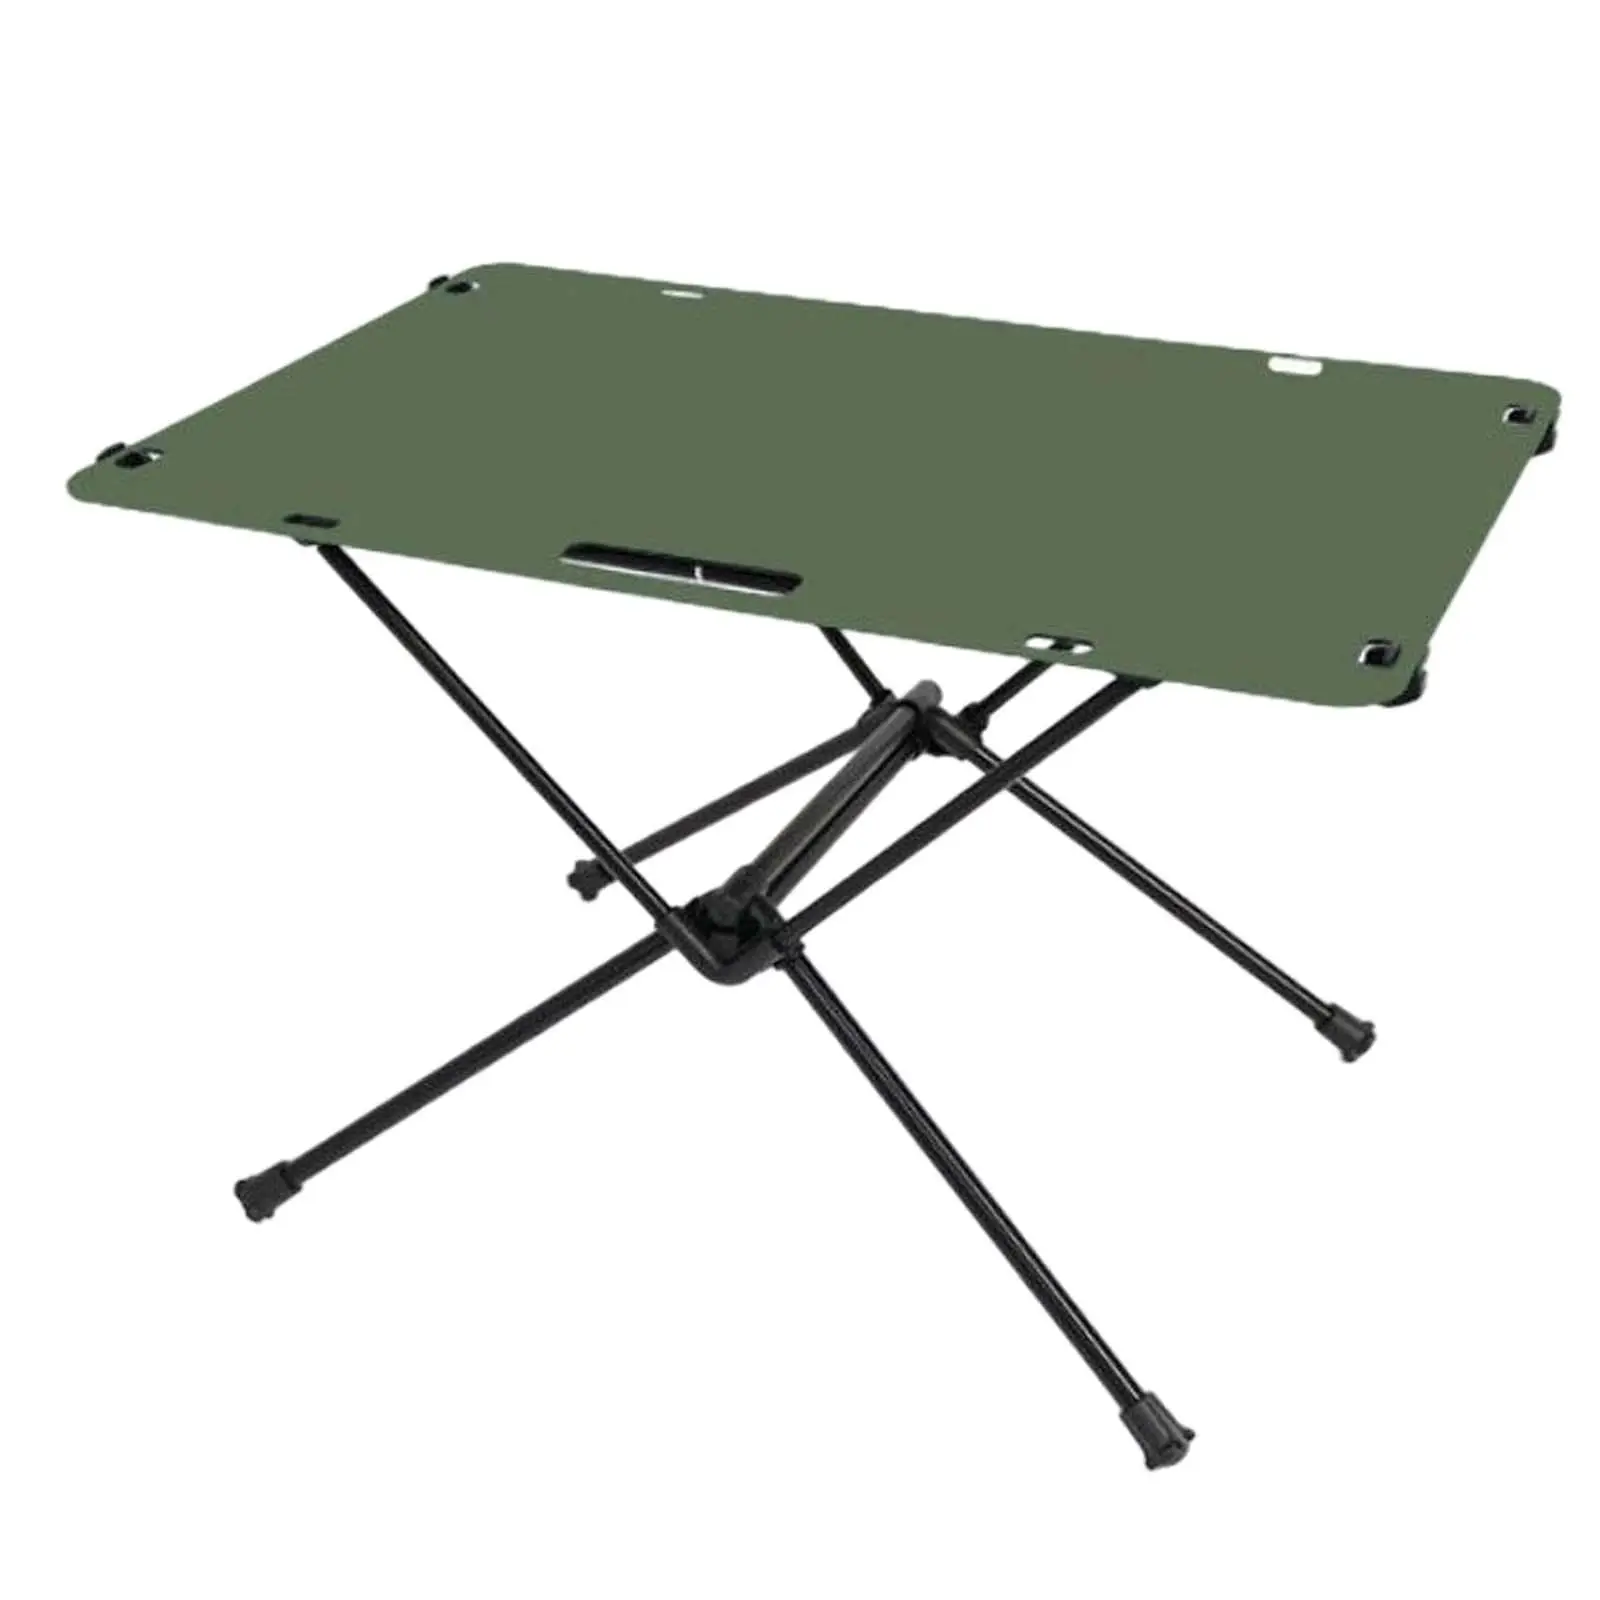 Lightweight Folding Beach Table with Carrying Bag Patio Aluminum Backyard Camping Table for Kitchen Hiking BBQ Fishing Yard